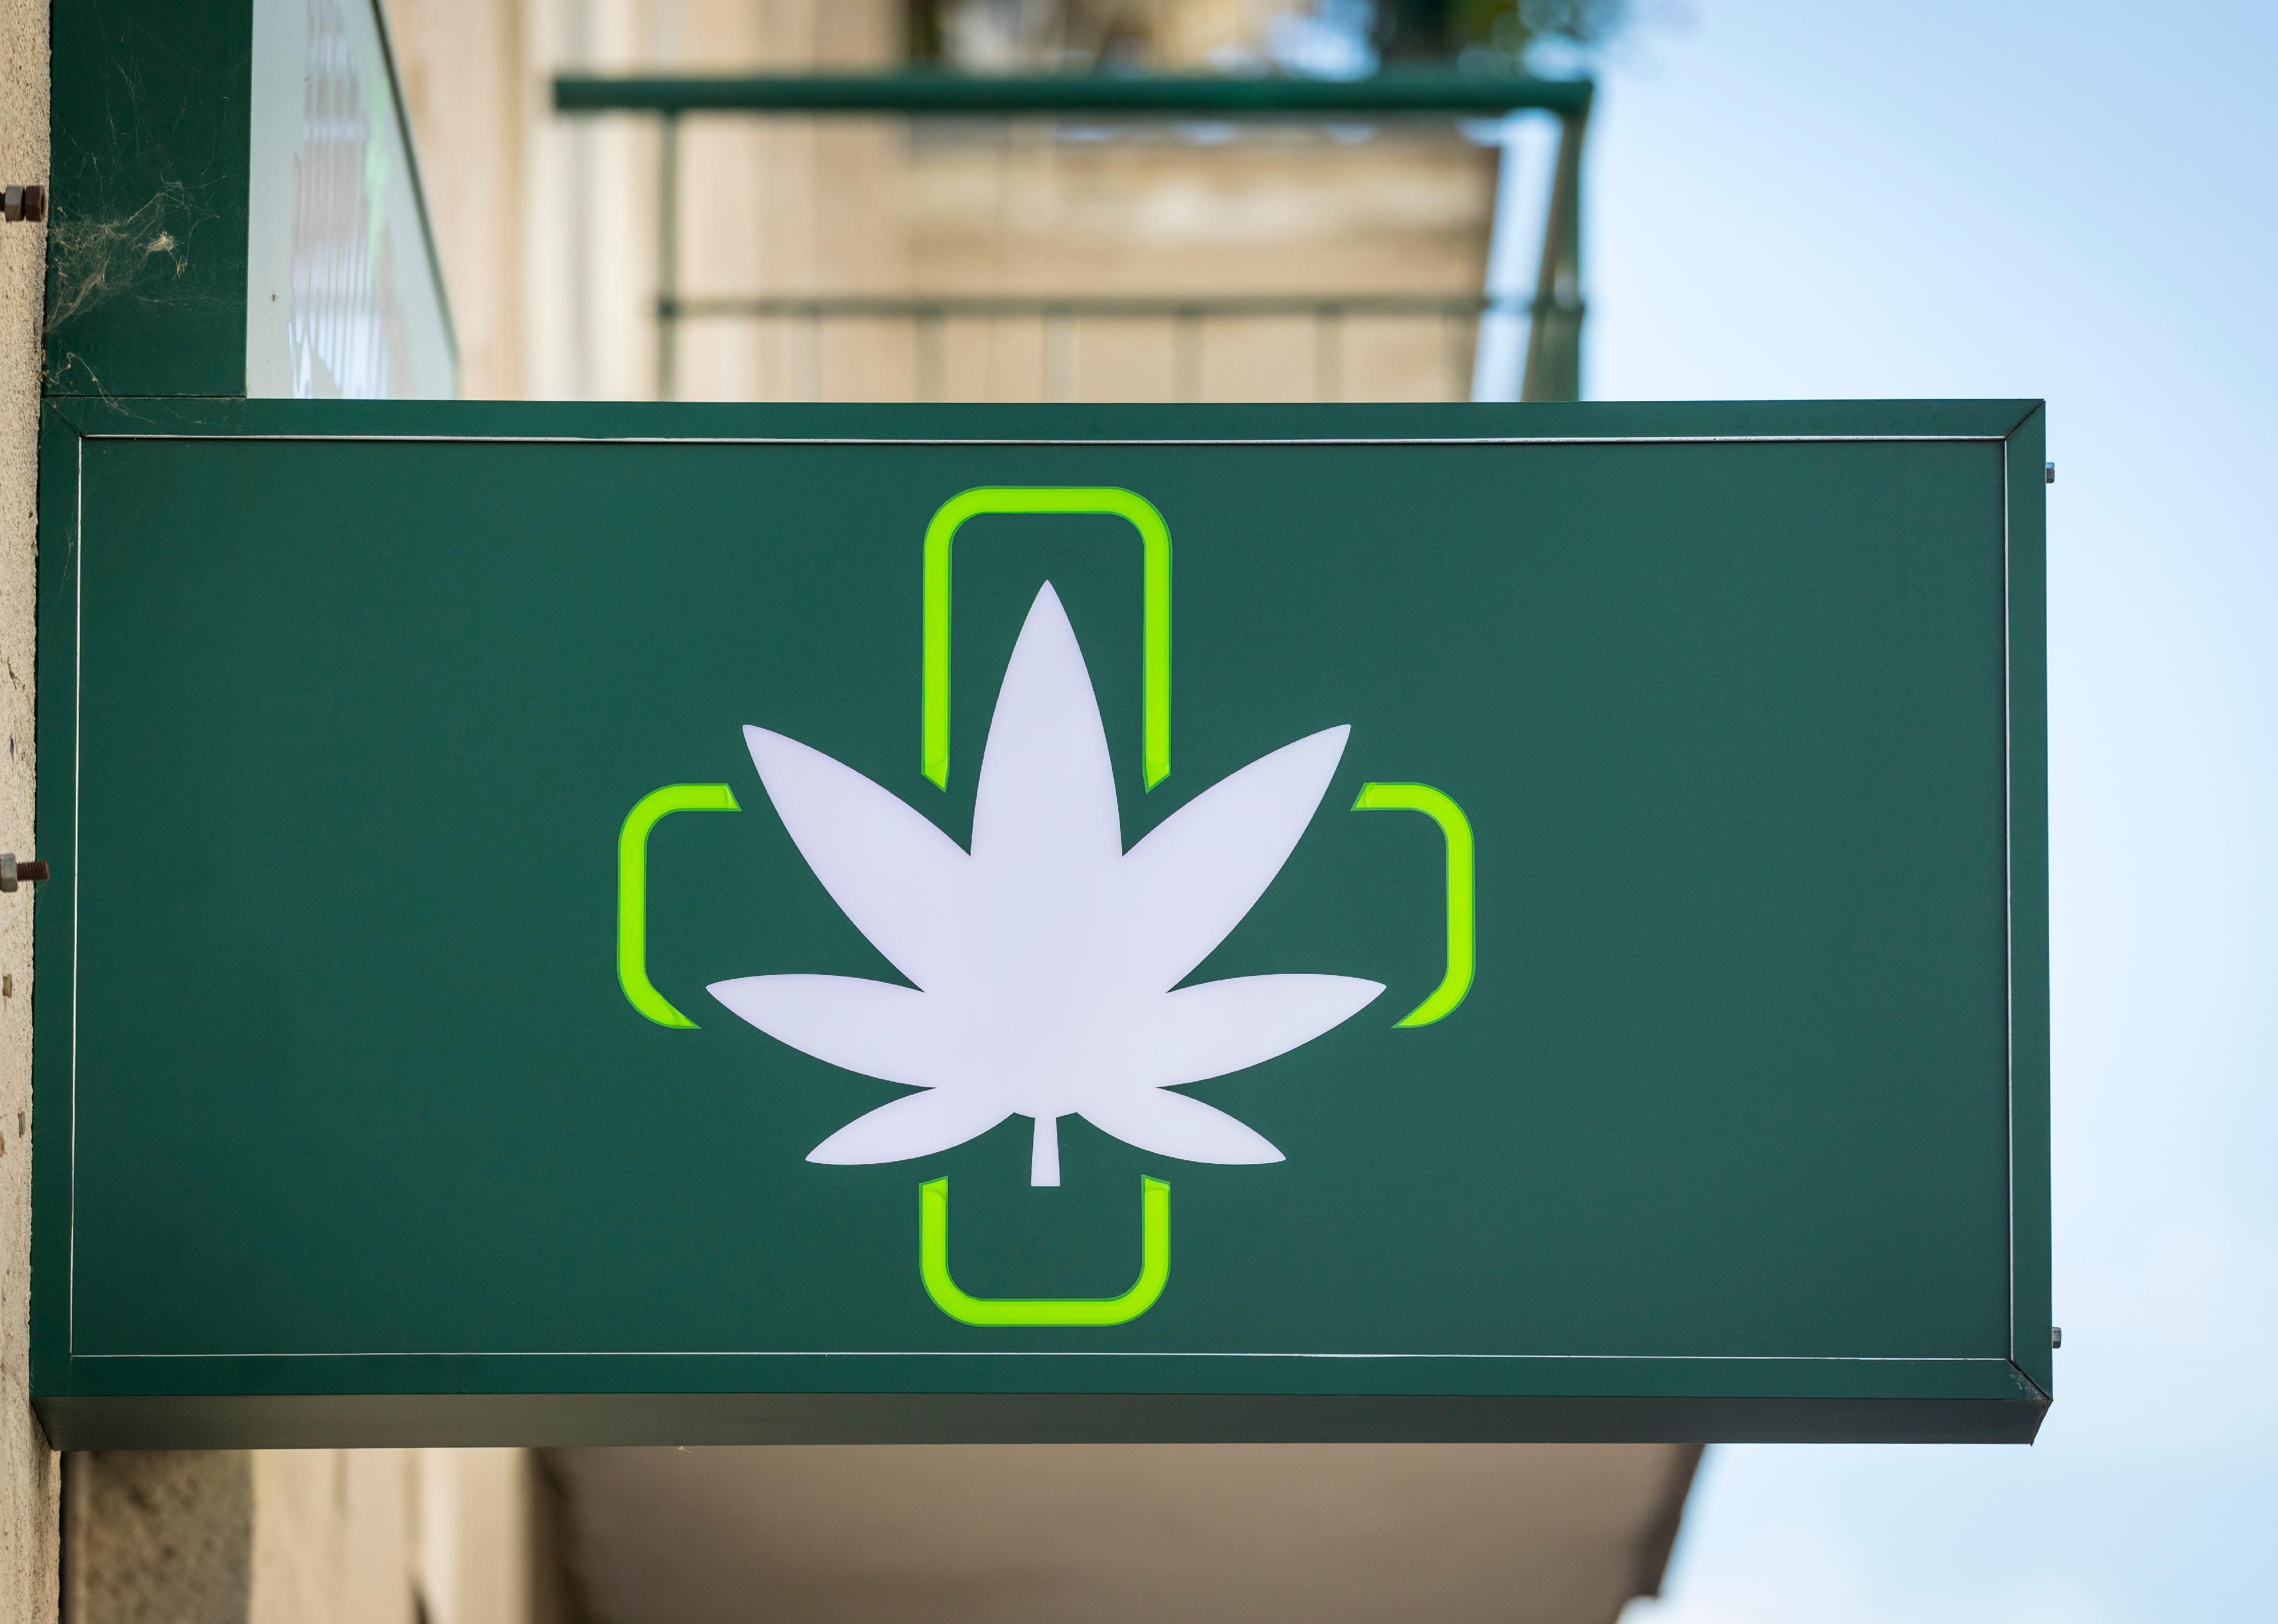 Dispensary sign on building.